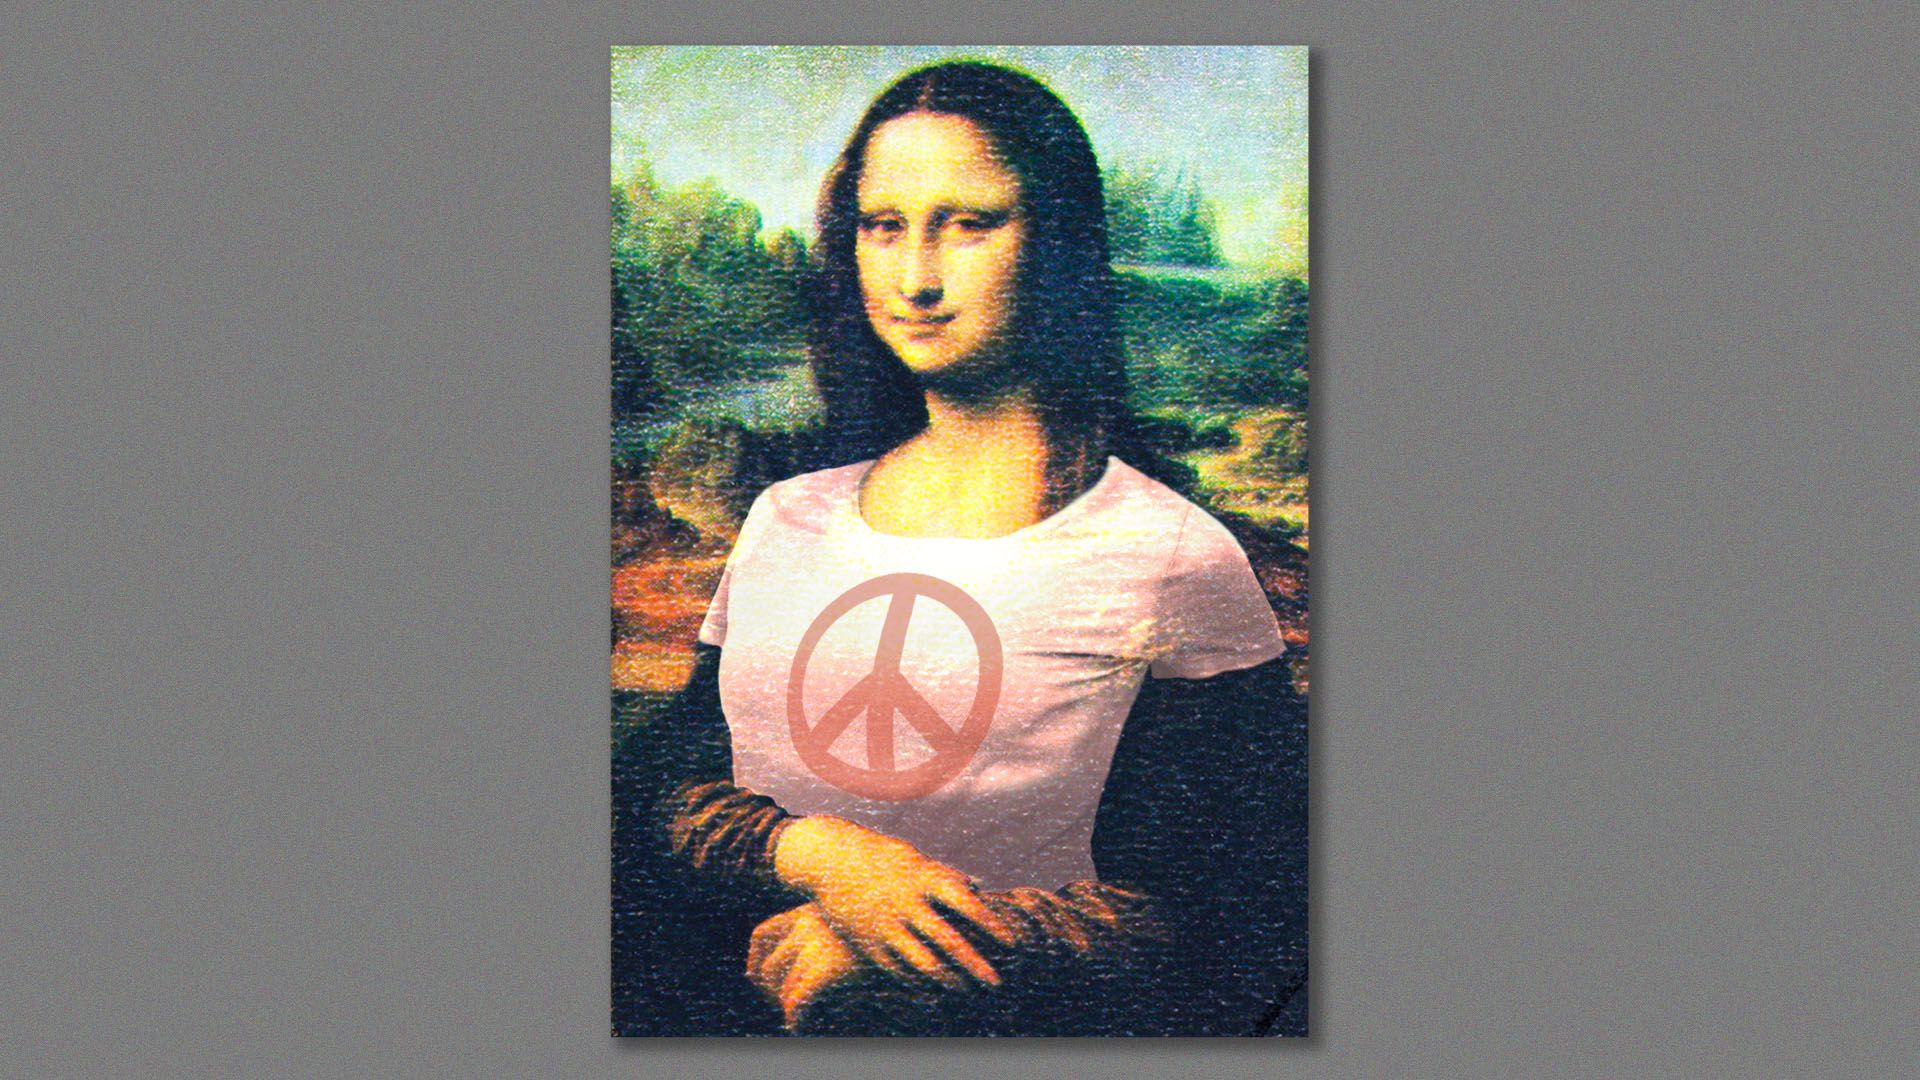 Illustration of Mona Lisa in a t-shirt with a peace sign